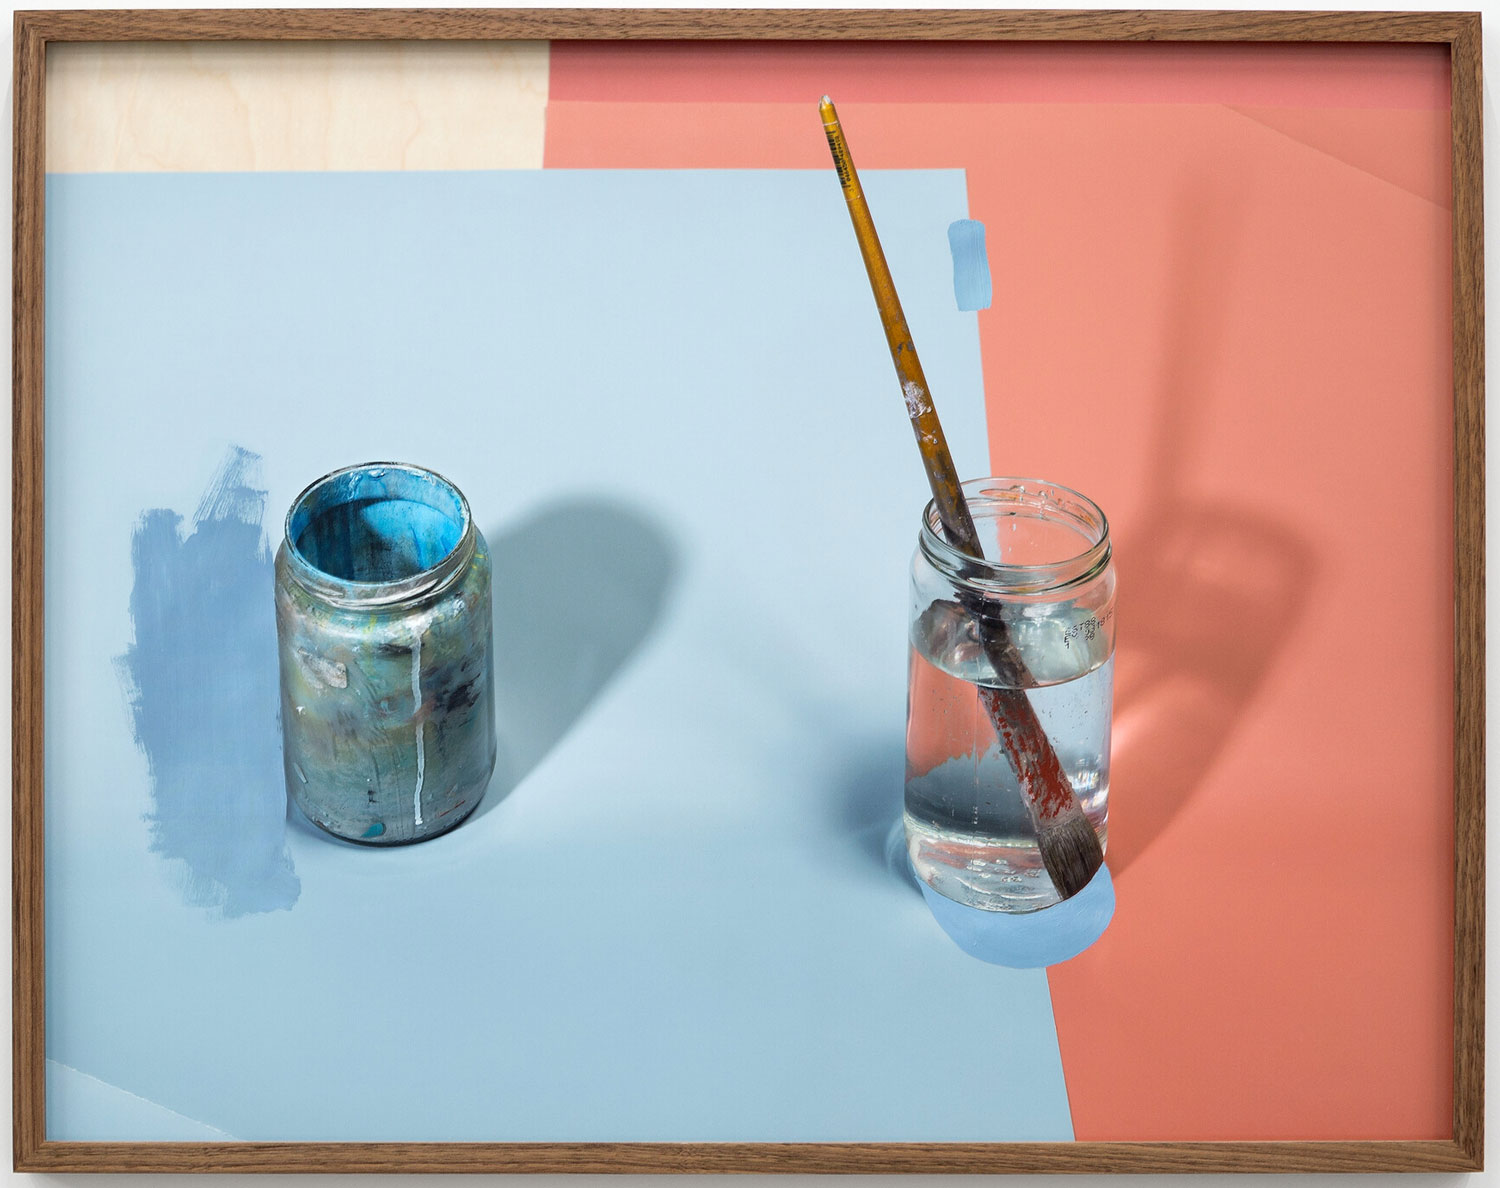 Glass of water with paintbrush next to a painting of a jar covered in paint